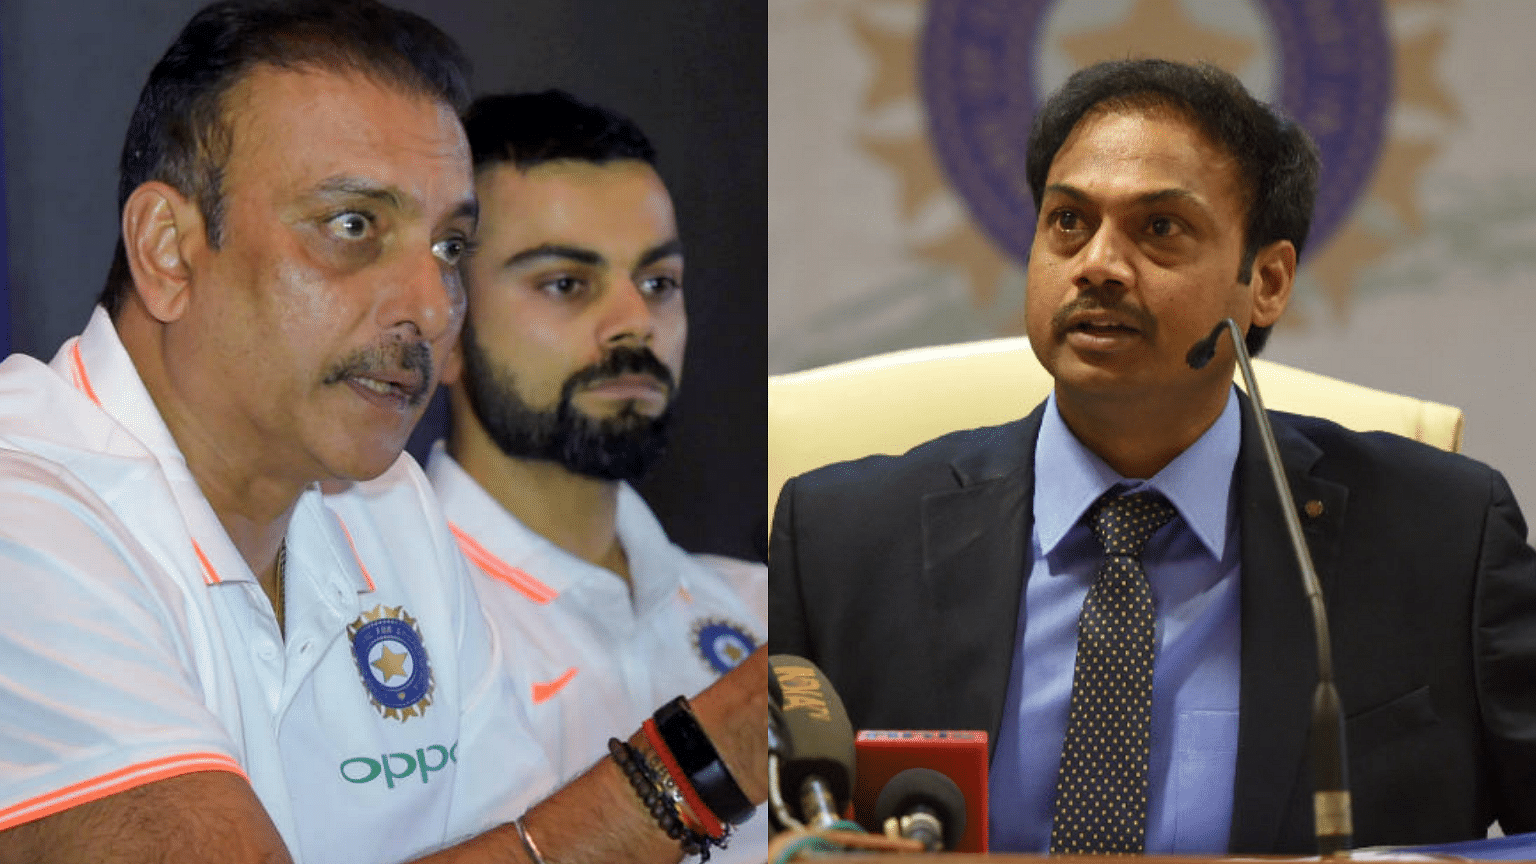 India’s chief coach Ravi Shastri and captain Virat Kohli (left) will be present at the meet along with the selection panel on Wednesday.